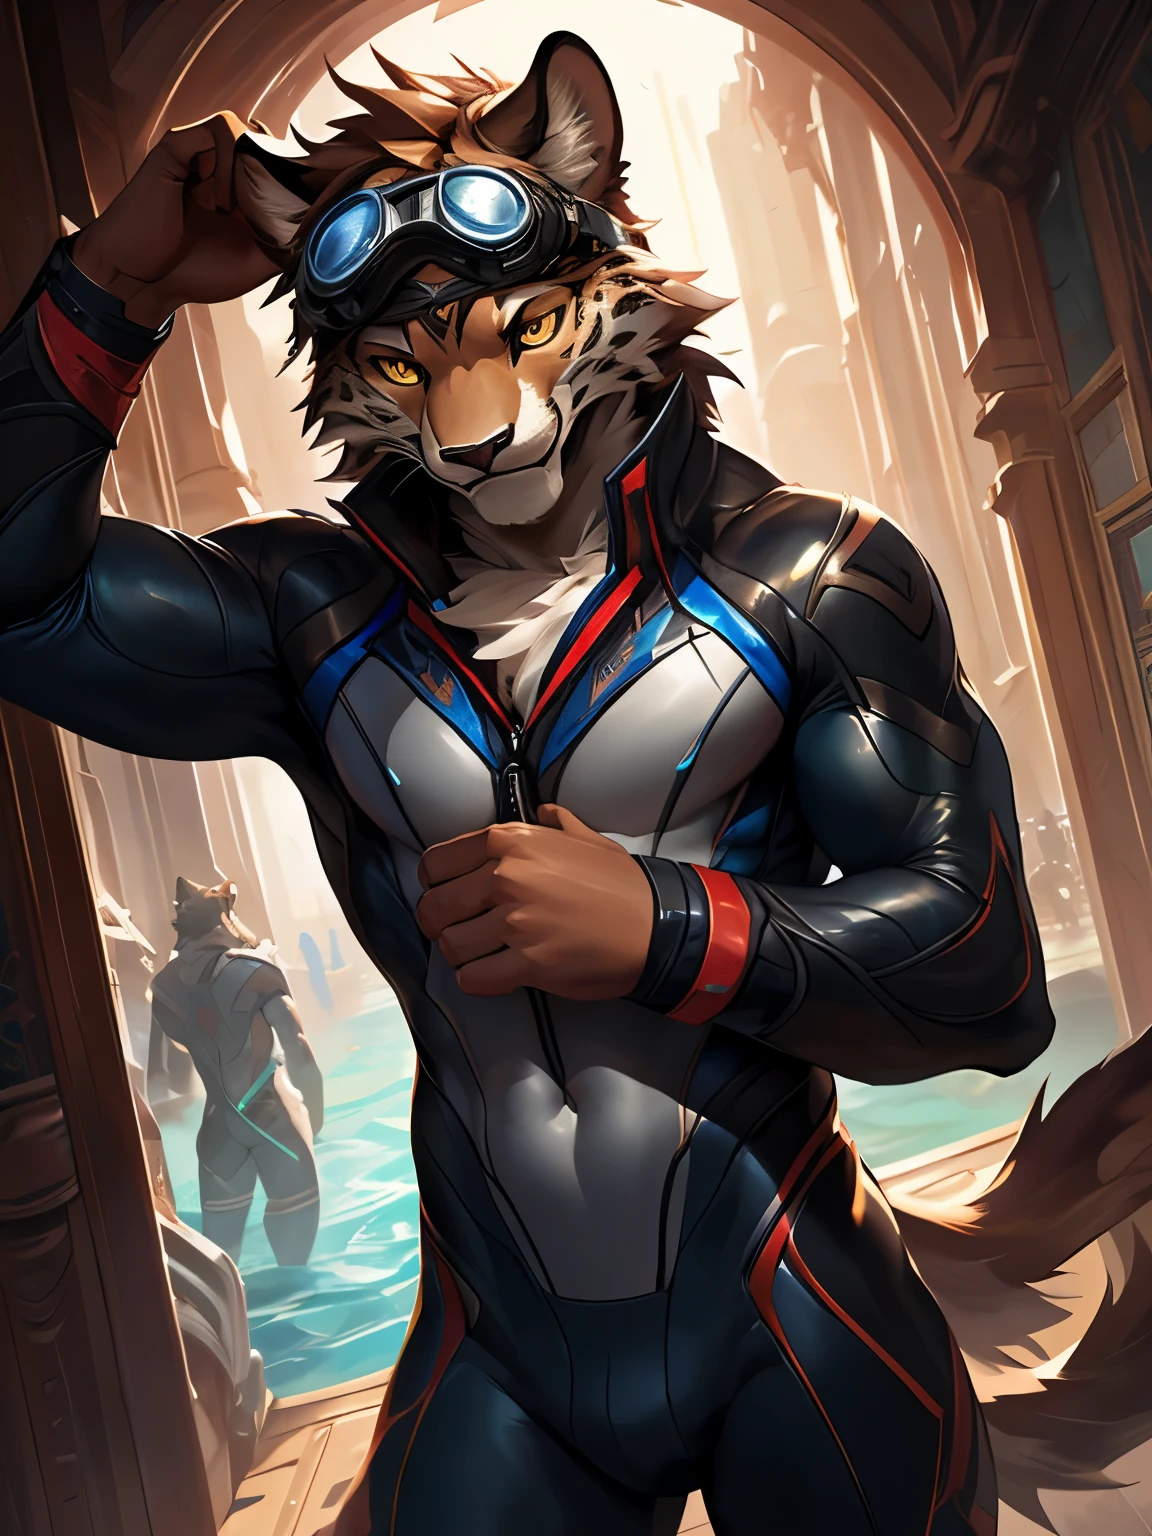 4k, ,8K, A high resolution, best quality, perfect colors, perfect shadows, perfect lighting, posted on e621, (by Chunie, by canyne khai, by t.y.starale), male, furry, Leopard anthro, solo, yellow eyes, (Realistic eye details 1.2), on the ship, wearing wetsuit, diving goggles on the head, Full body like, Slim body, dramatic lighting, soft lighting, day, highly detail, Hair coiled, delight, Standing up position, cool pose charm, Abstract beauty, centre, Looking at the camera, Facing the camera, nearing perfection, Dynamic, highly detailed, illustration, (Realistic background), ((Bonifasko lighting)), (Detailed eyes), perfect pupils, detail eyes, detail fluffy fur, (seductive face:1.2), fit body, Looking at the camera,, fit body, perfect male figure, Detailed fur, Detailed face, Perfect face, Detailed background, (Complex), (Super Detail), (Ultra Clear), (Best Quality)